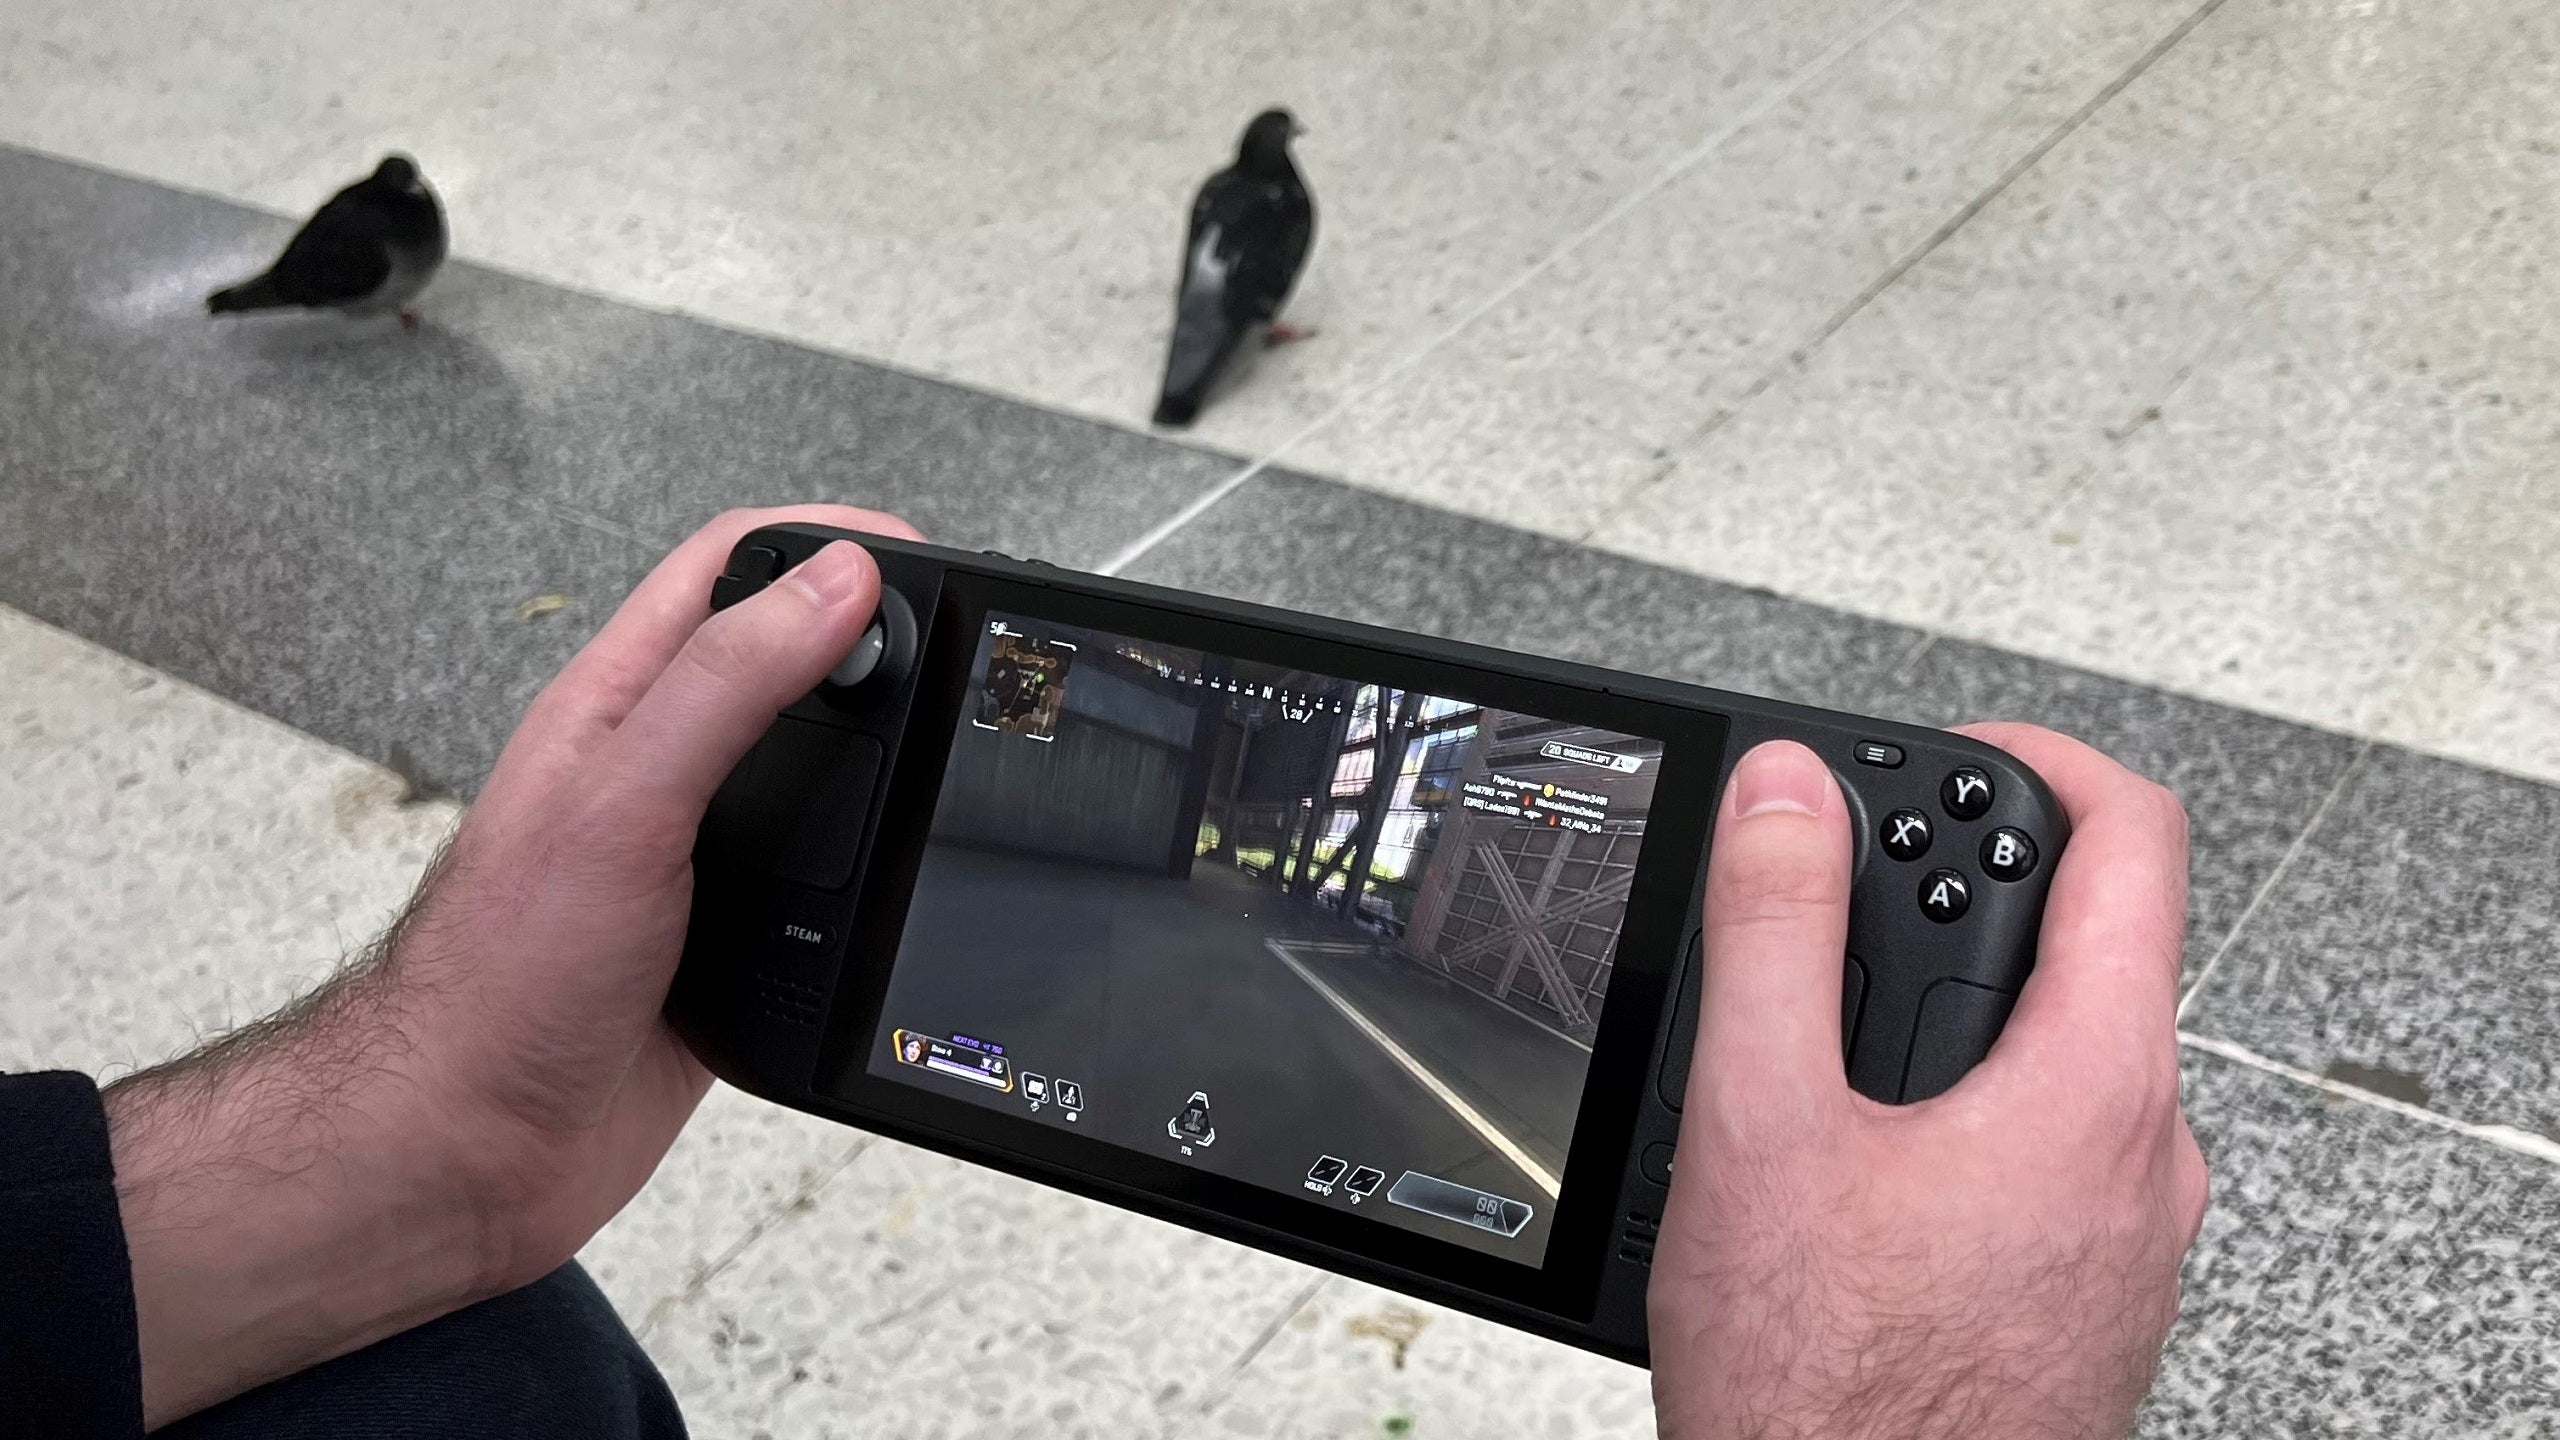 Apex Legends being played on a Steam Deck, with two pidgeons wandering around in the background.